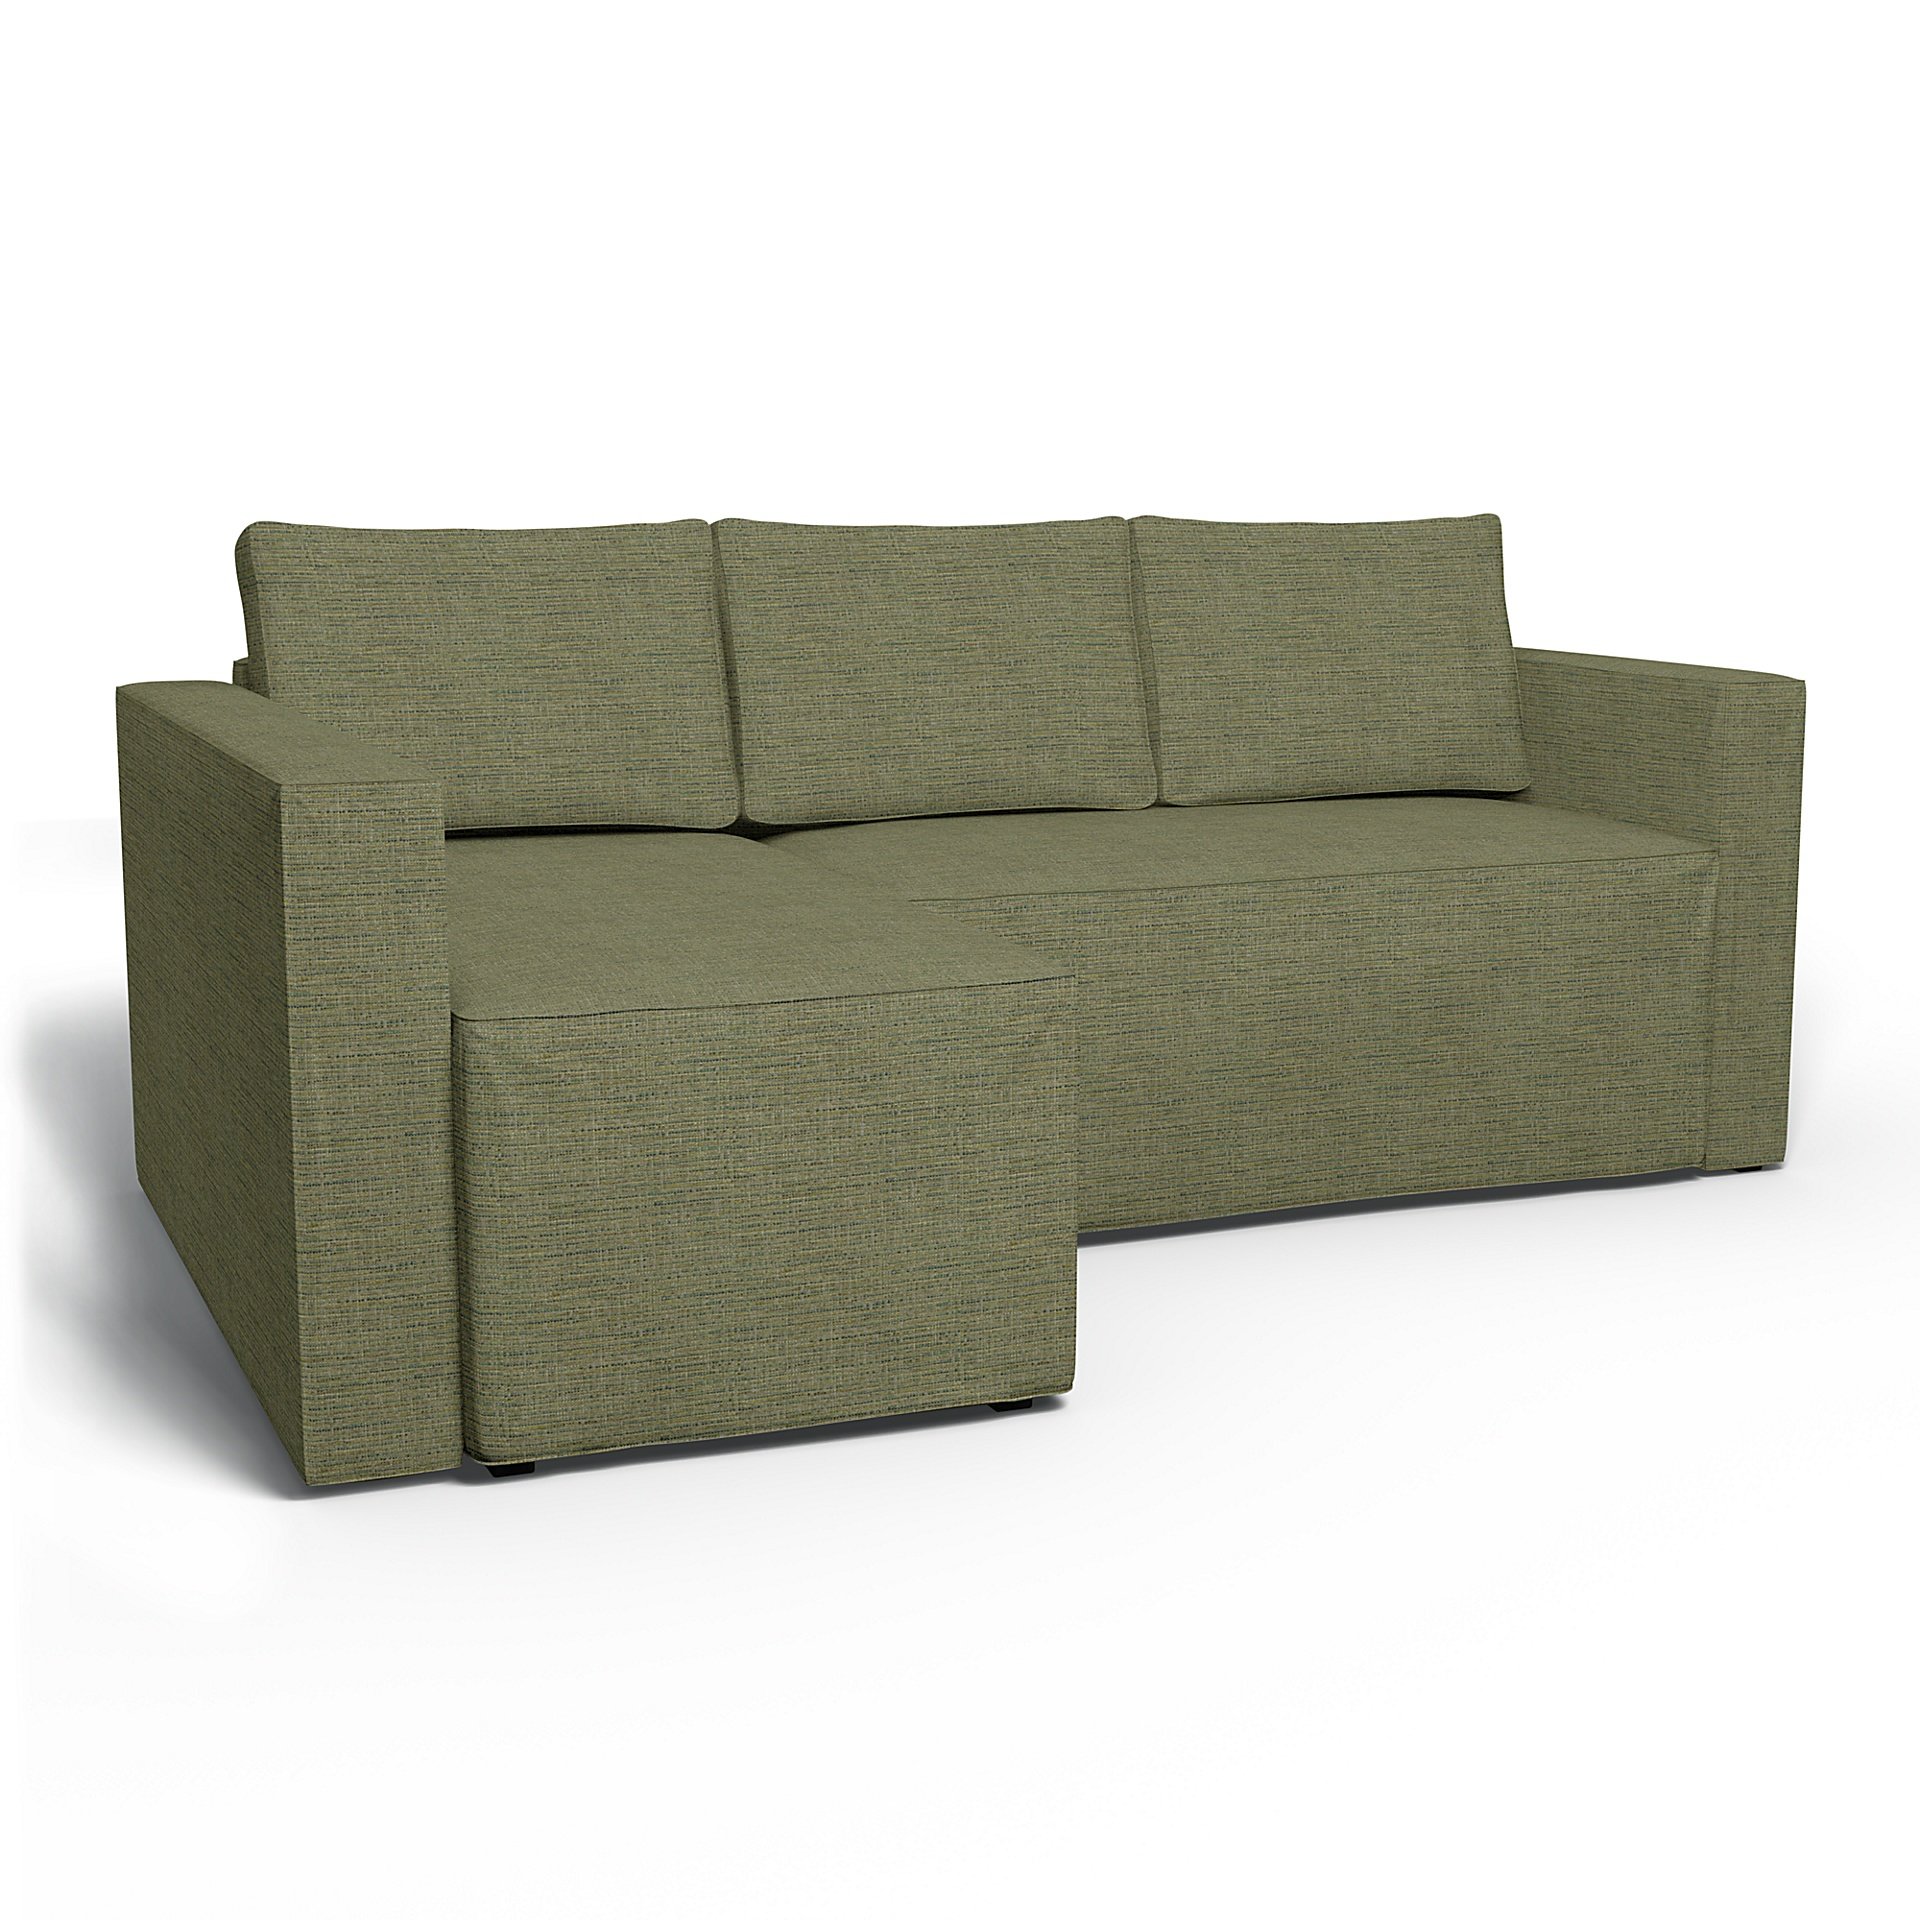 IKEA - Manstad Sofa Bed with Left Chaise Cover, Meadow Green, Boucle & Texture - Bemz